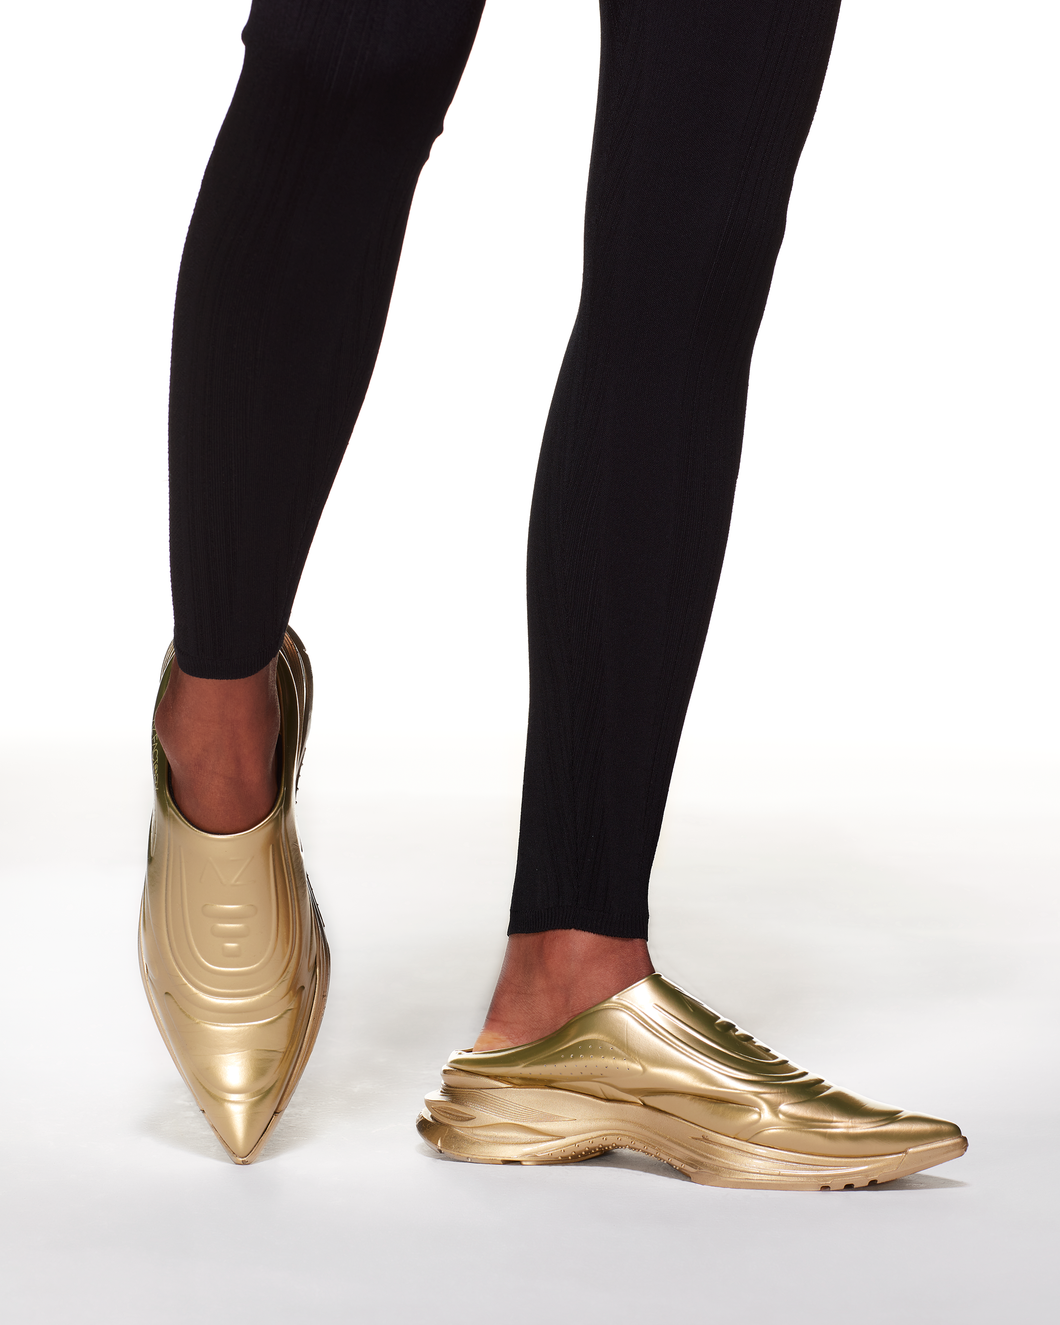 POINTY SNEAKS SLIP ON - GOLD